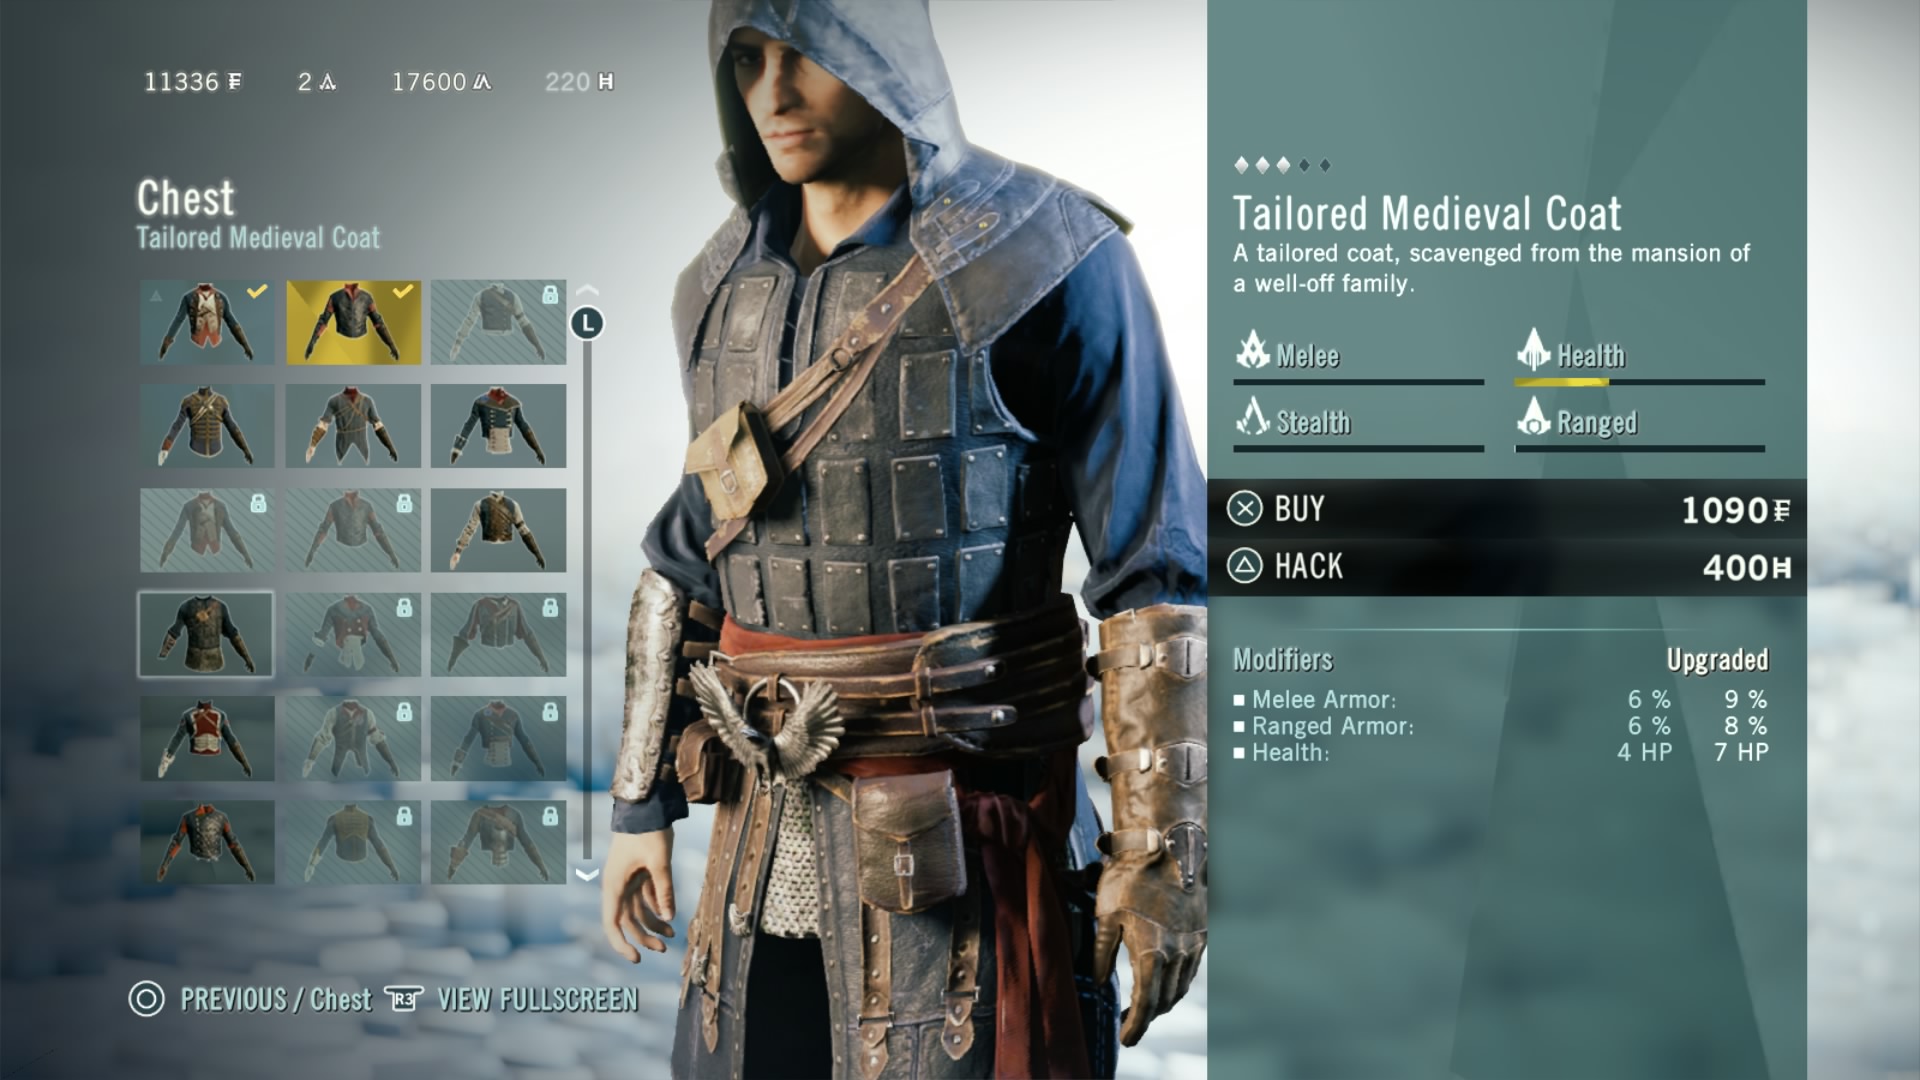 Assassin's Creed: Unity has four-player campaign multiplayer